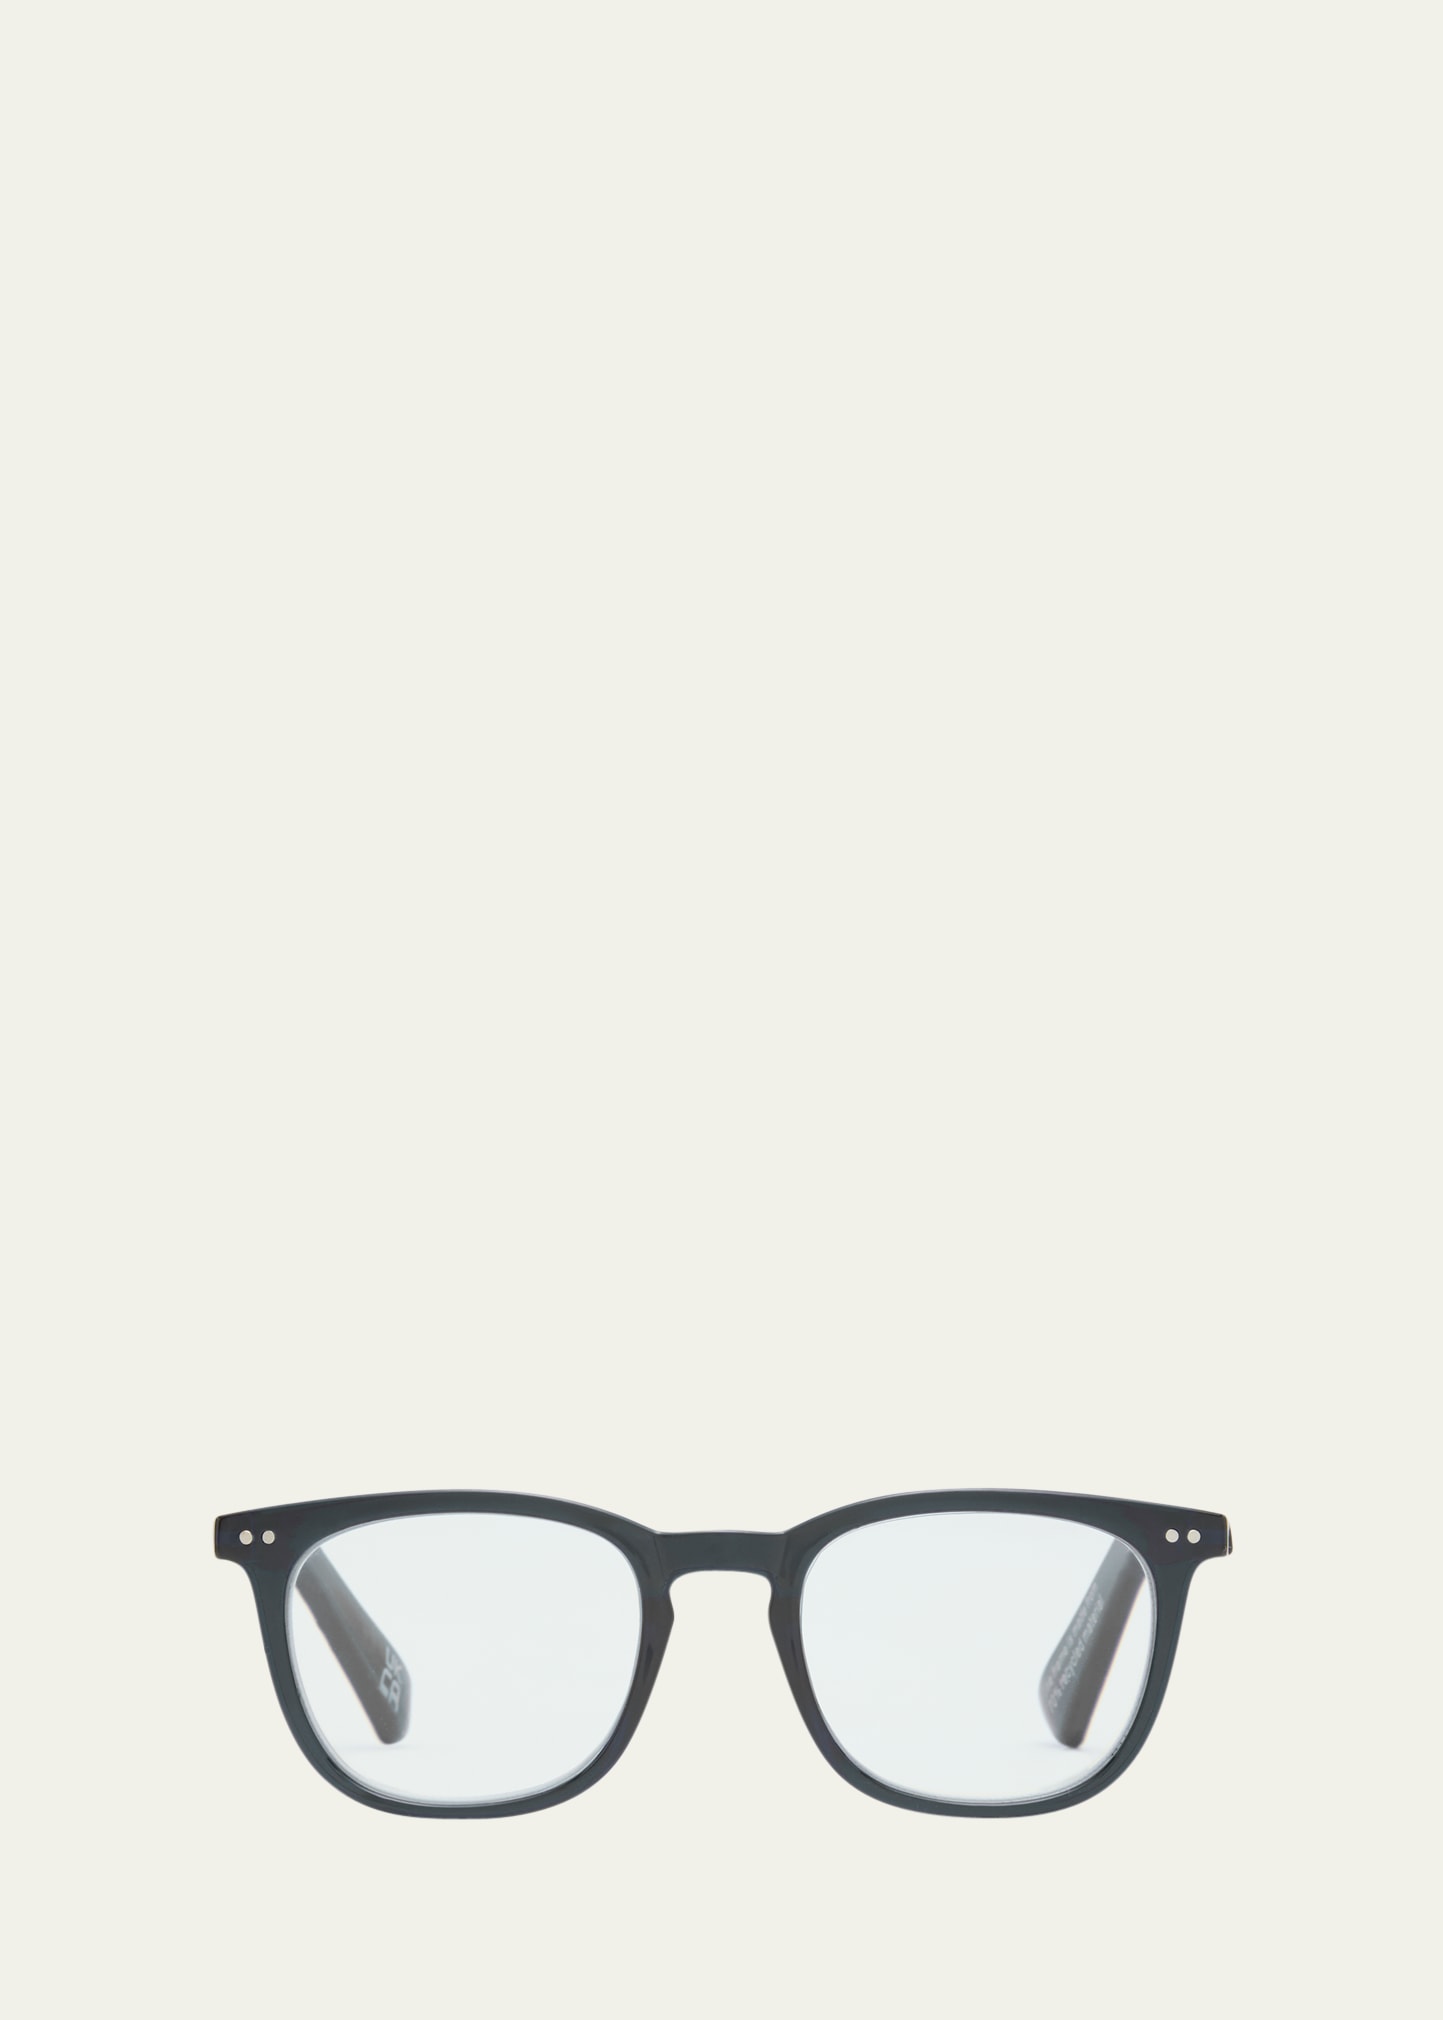 The Whirl Acetate Square Reading Glasses